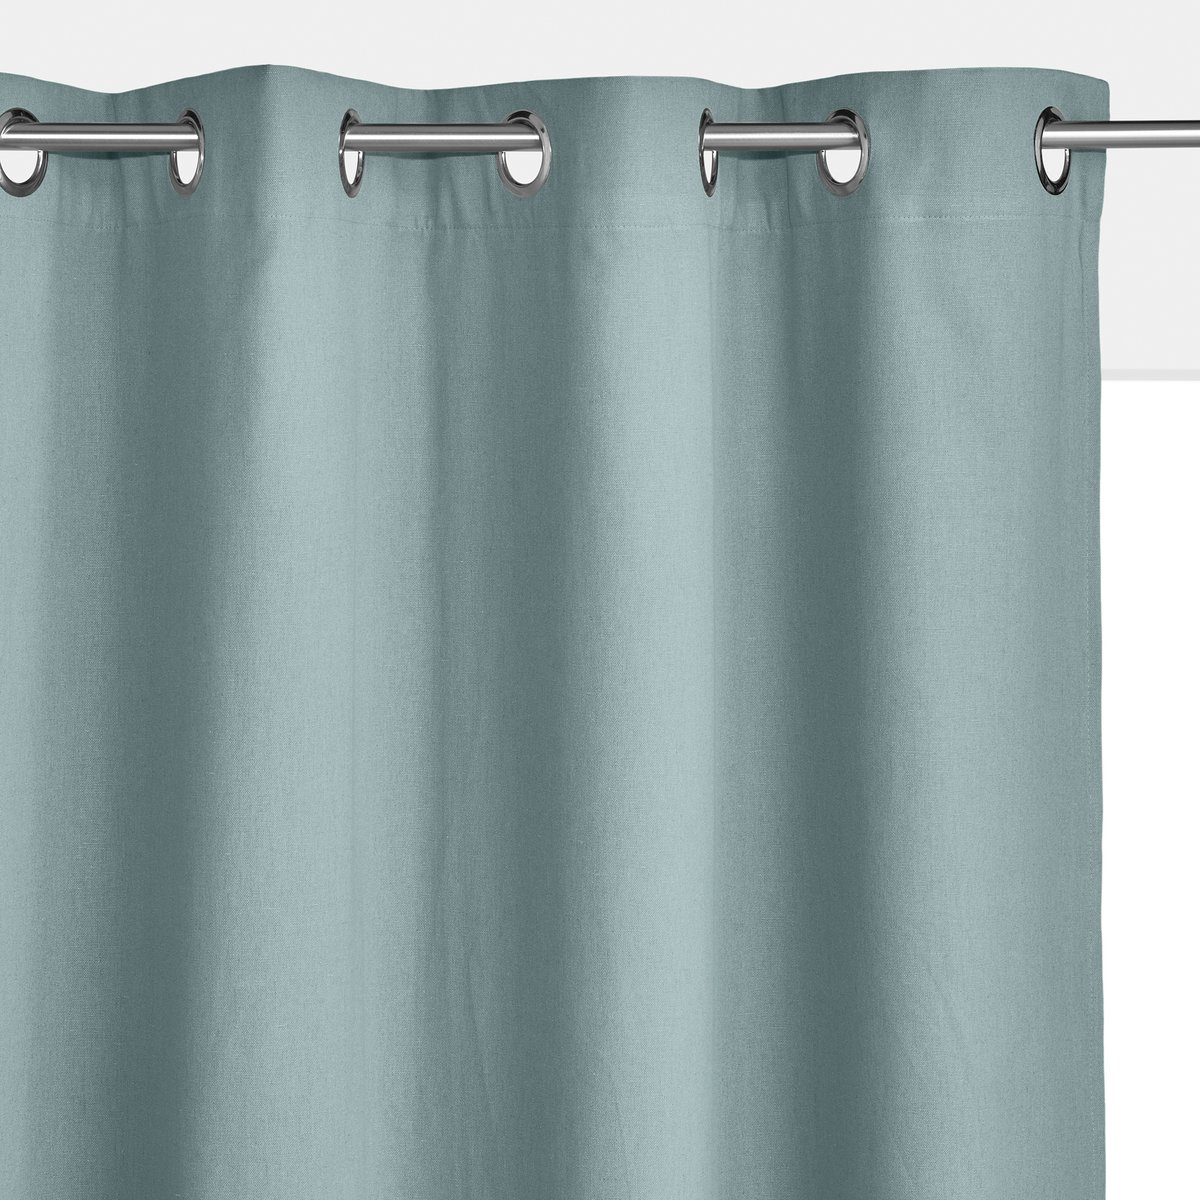 Image of Taima Linen/Cotton Single Blackout Lined Curtain with Eyelets